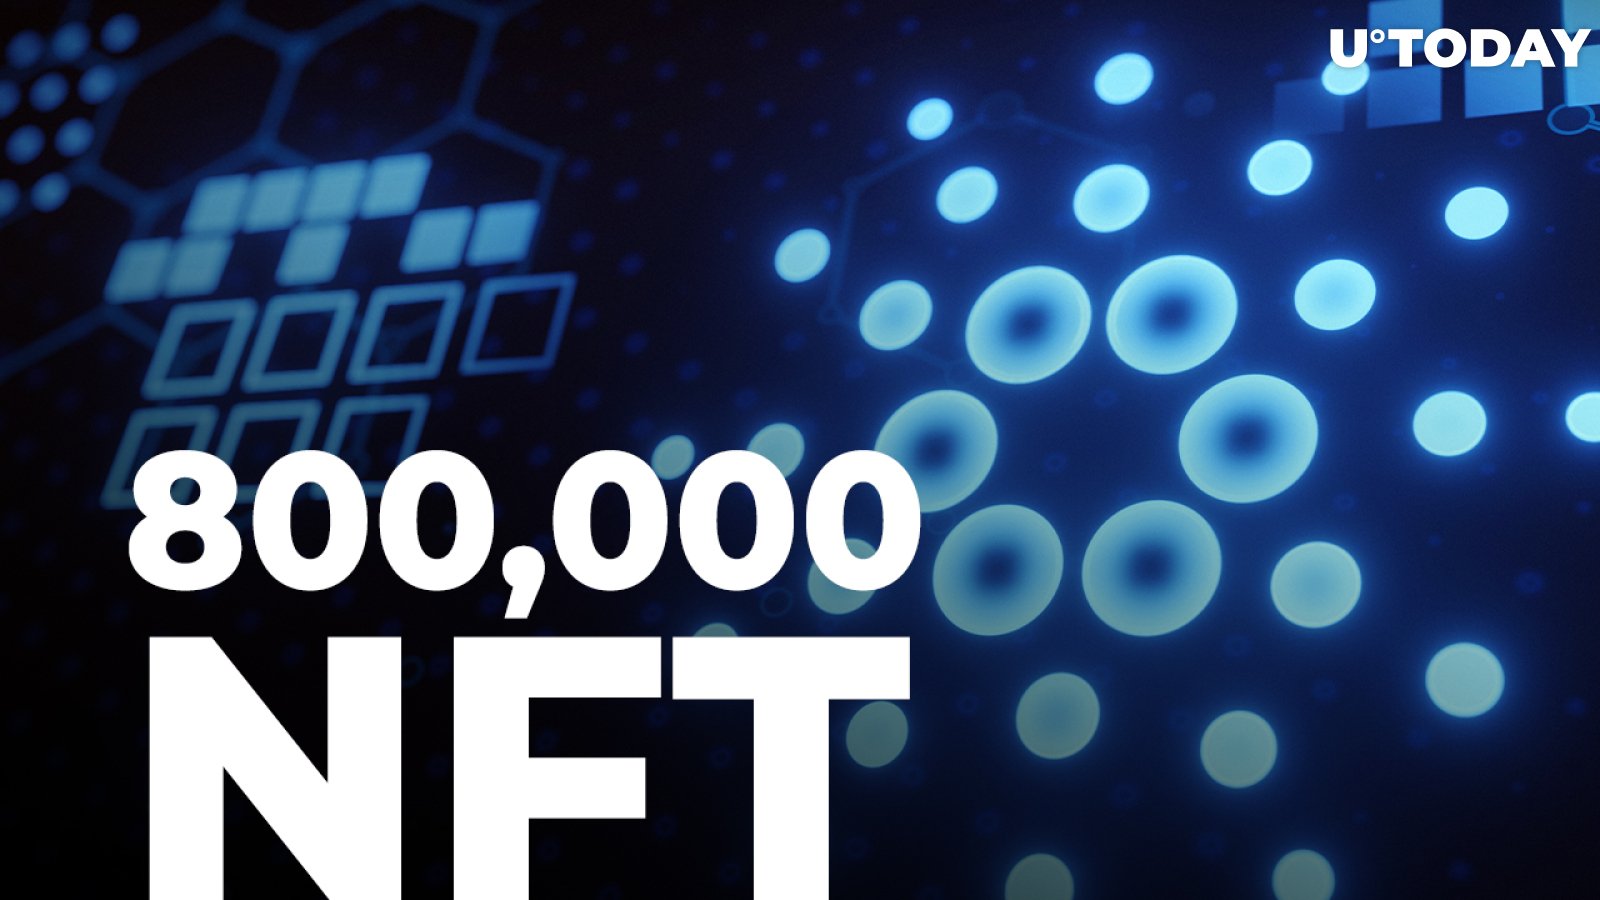 More Than 800,000 NFTs Minted on Cardano Since March as Number of Projects Increases